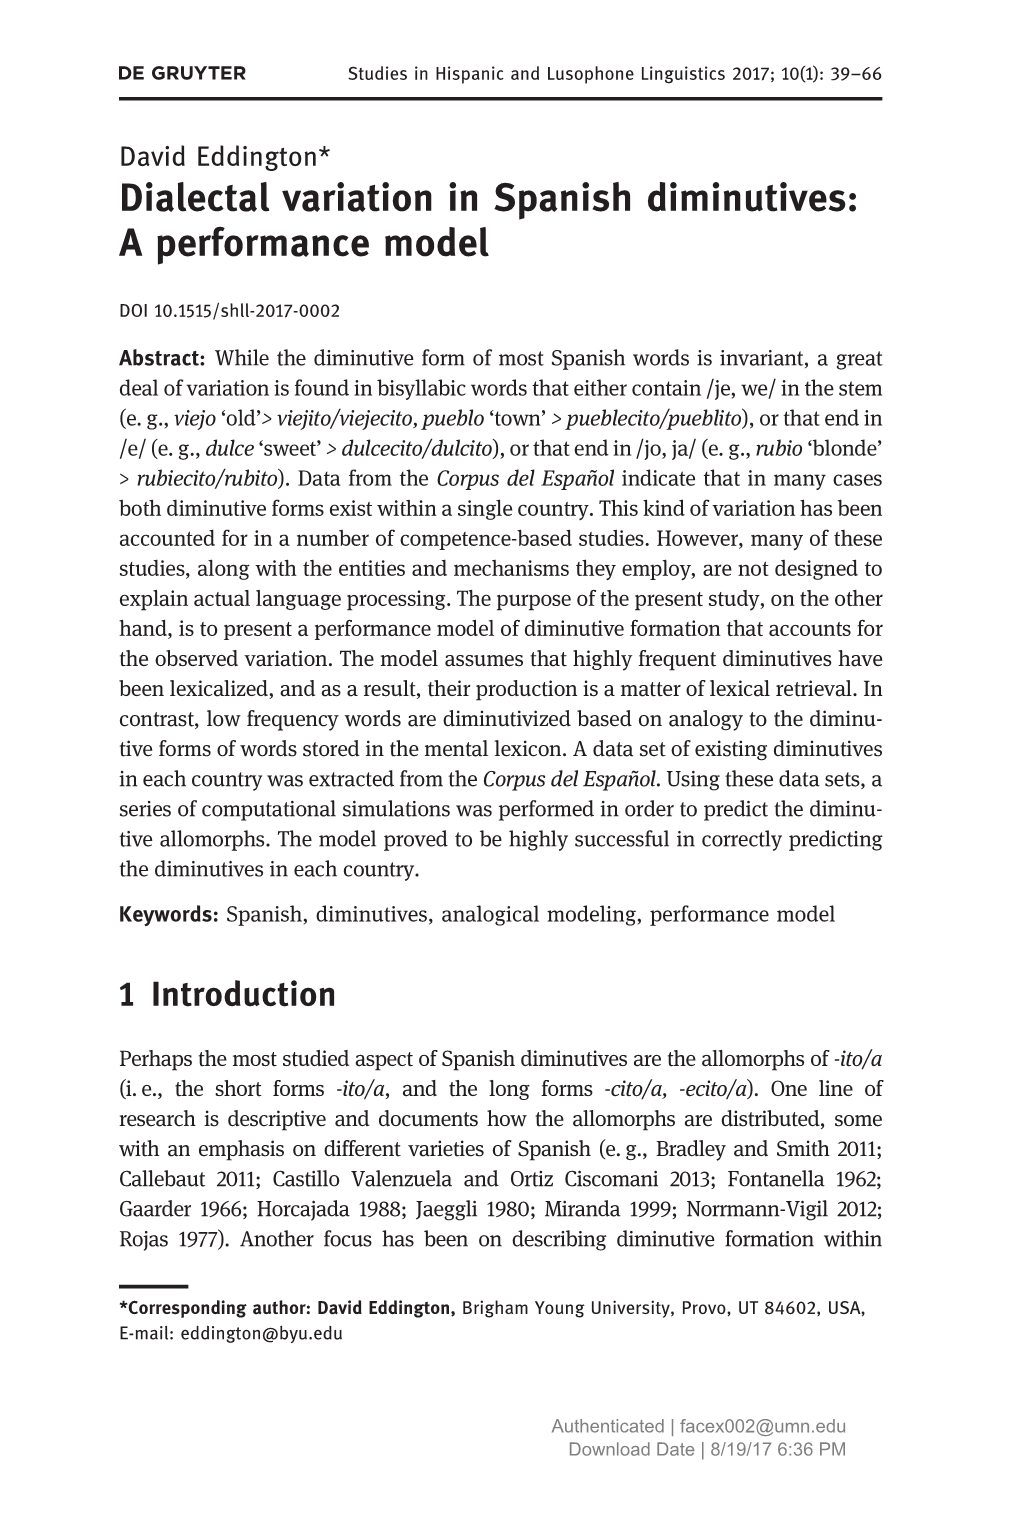 Dialectal Variation in Spanish Diminutives: a Performance Model